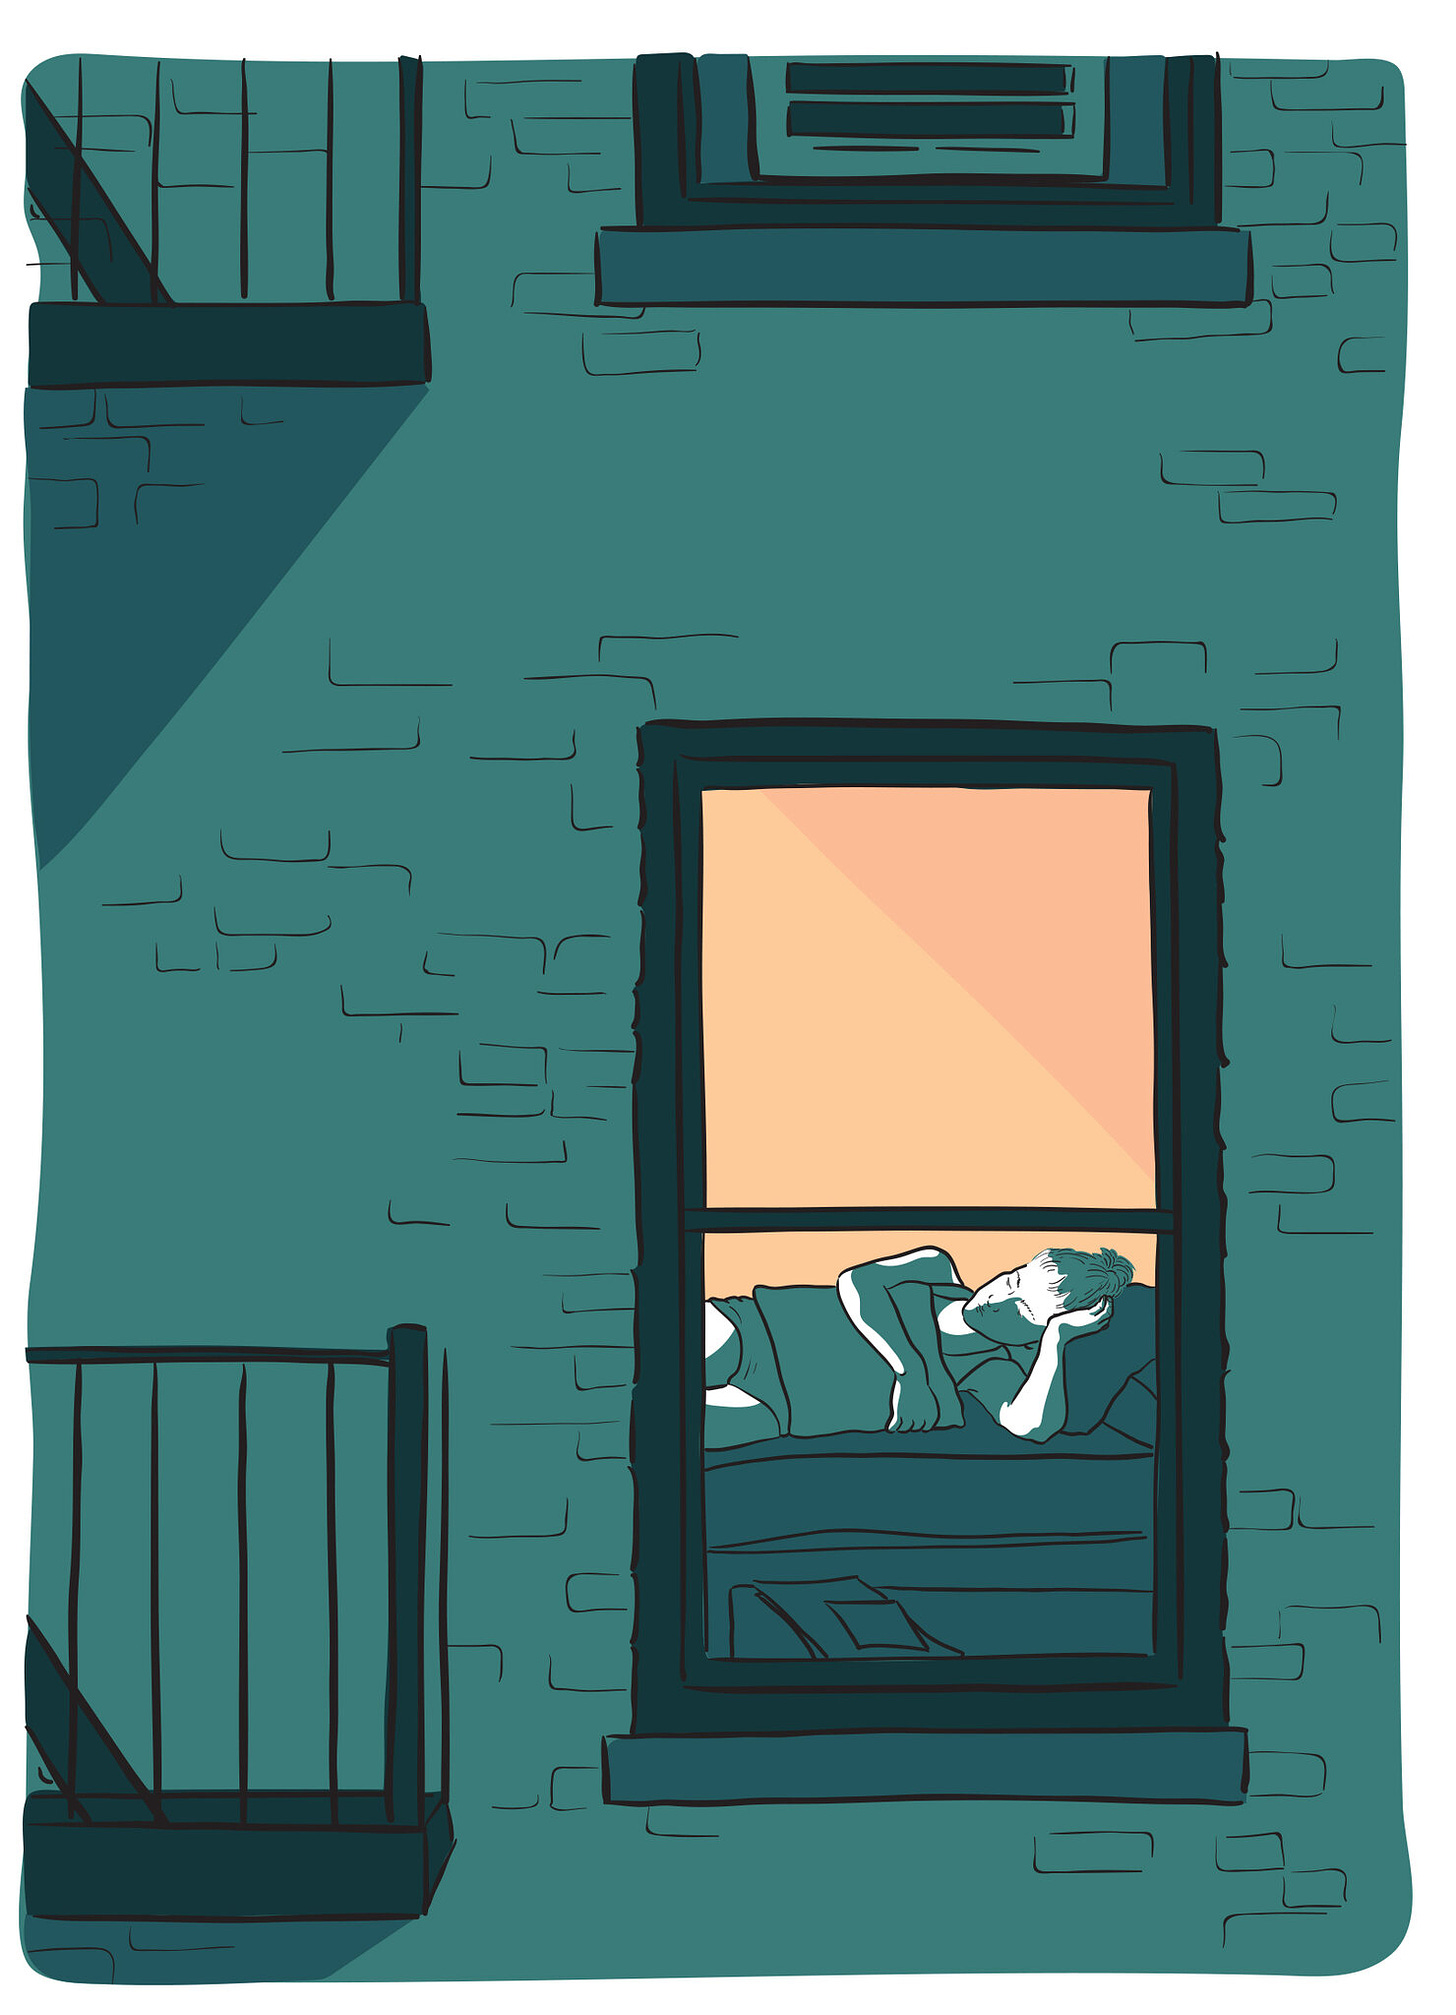 Artwork from Seek You. it is blue-toned and features a building with a window. Through the window, you can see a single person laying in a bed alone.